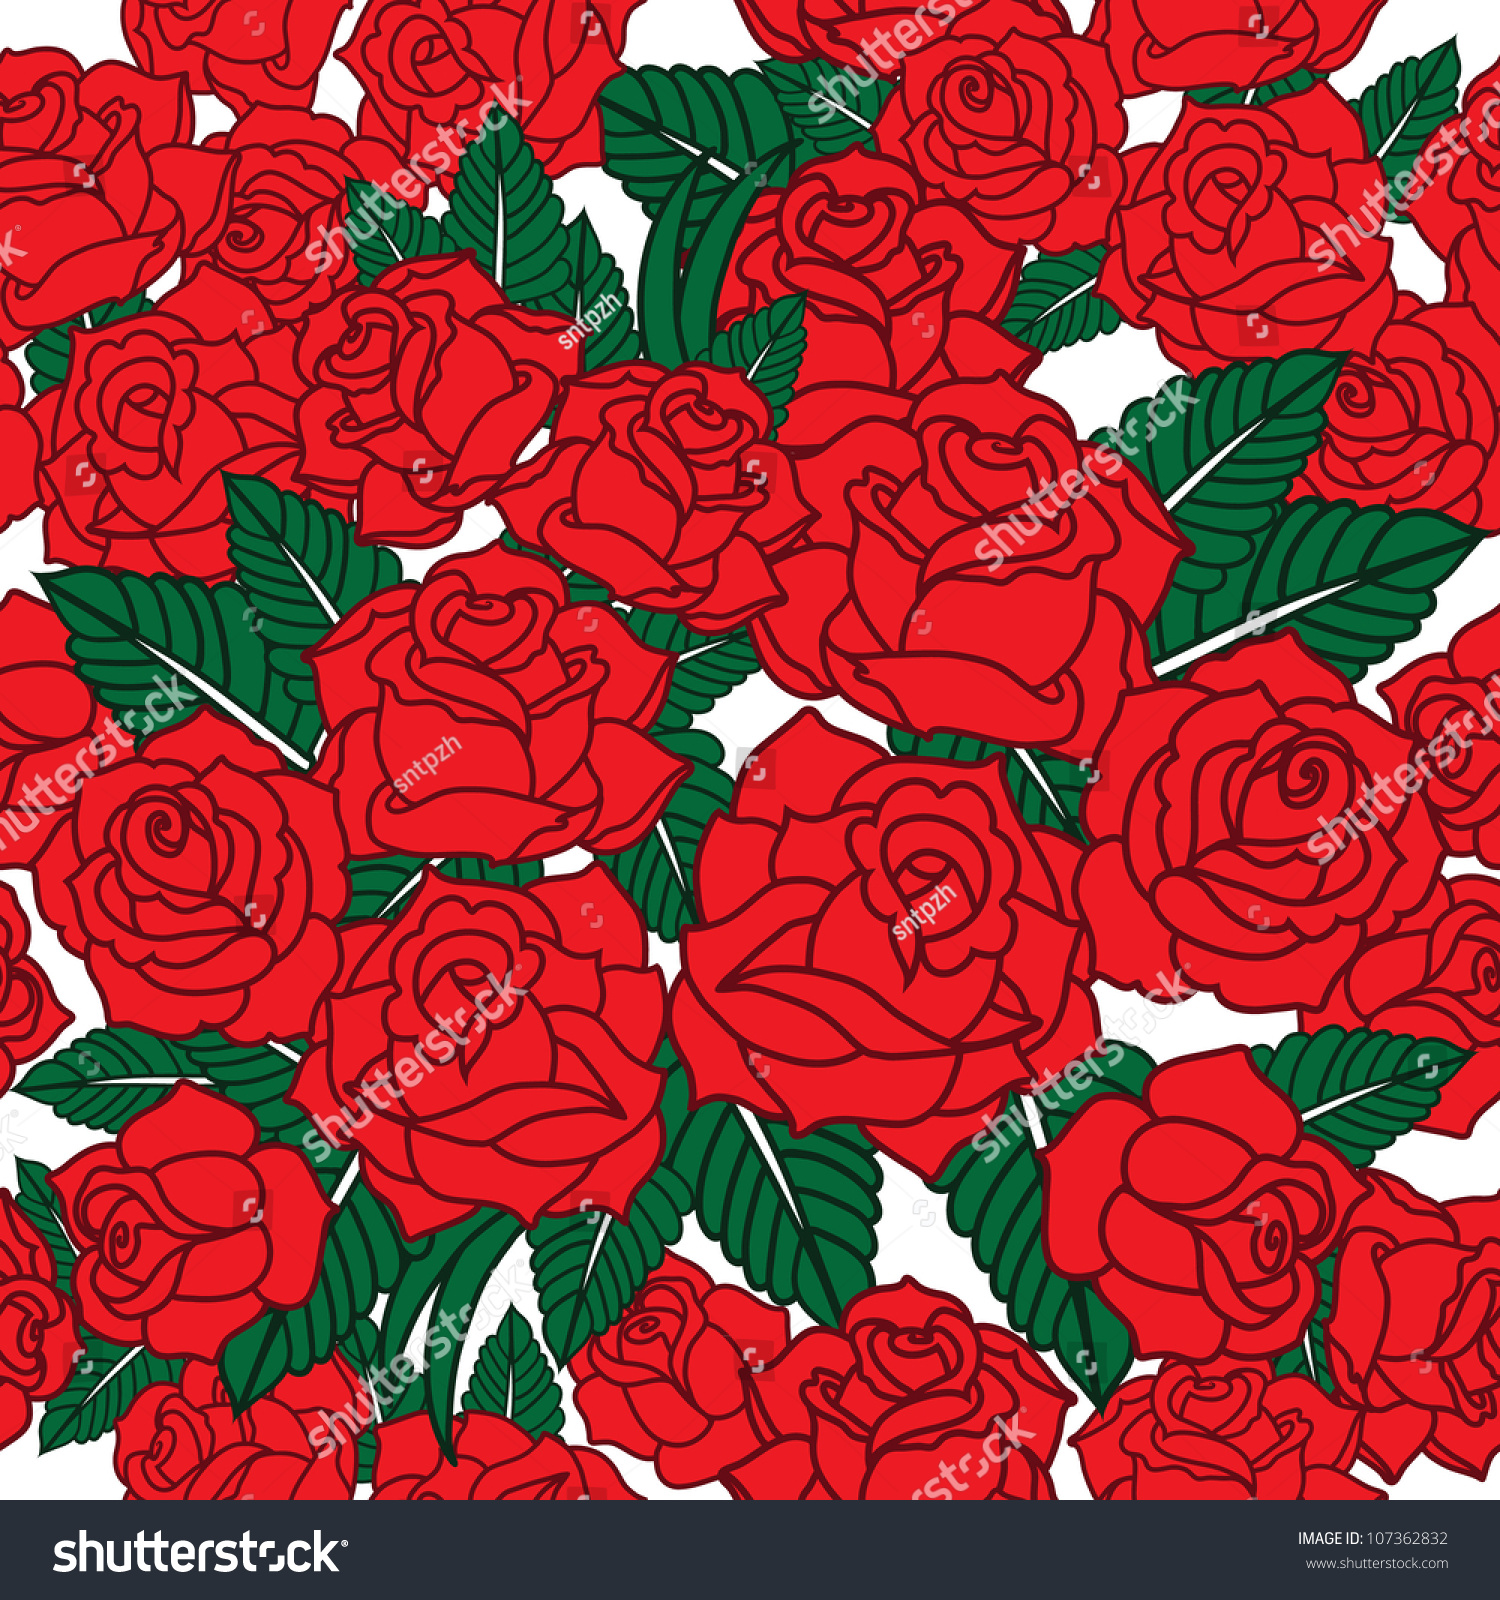 Vector Pattern With Roses - 107362832 : Shutterstock